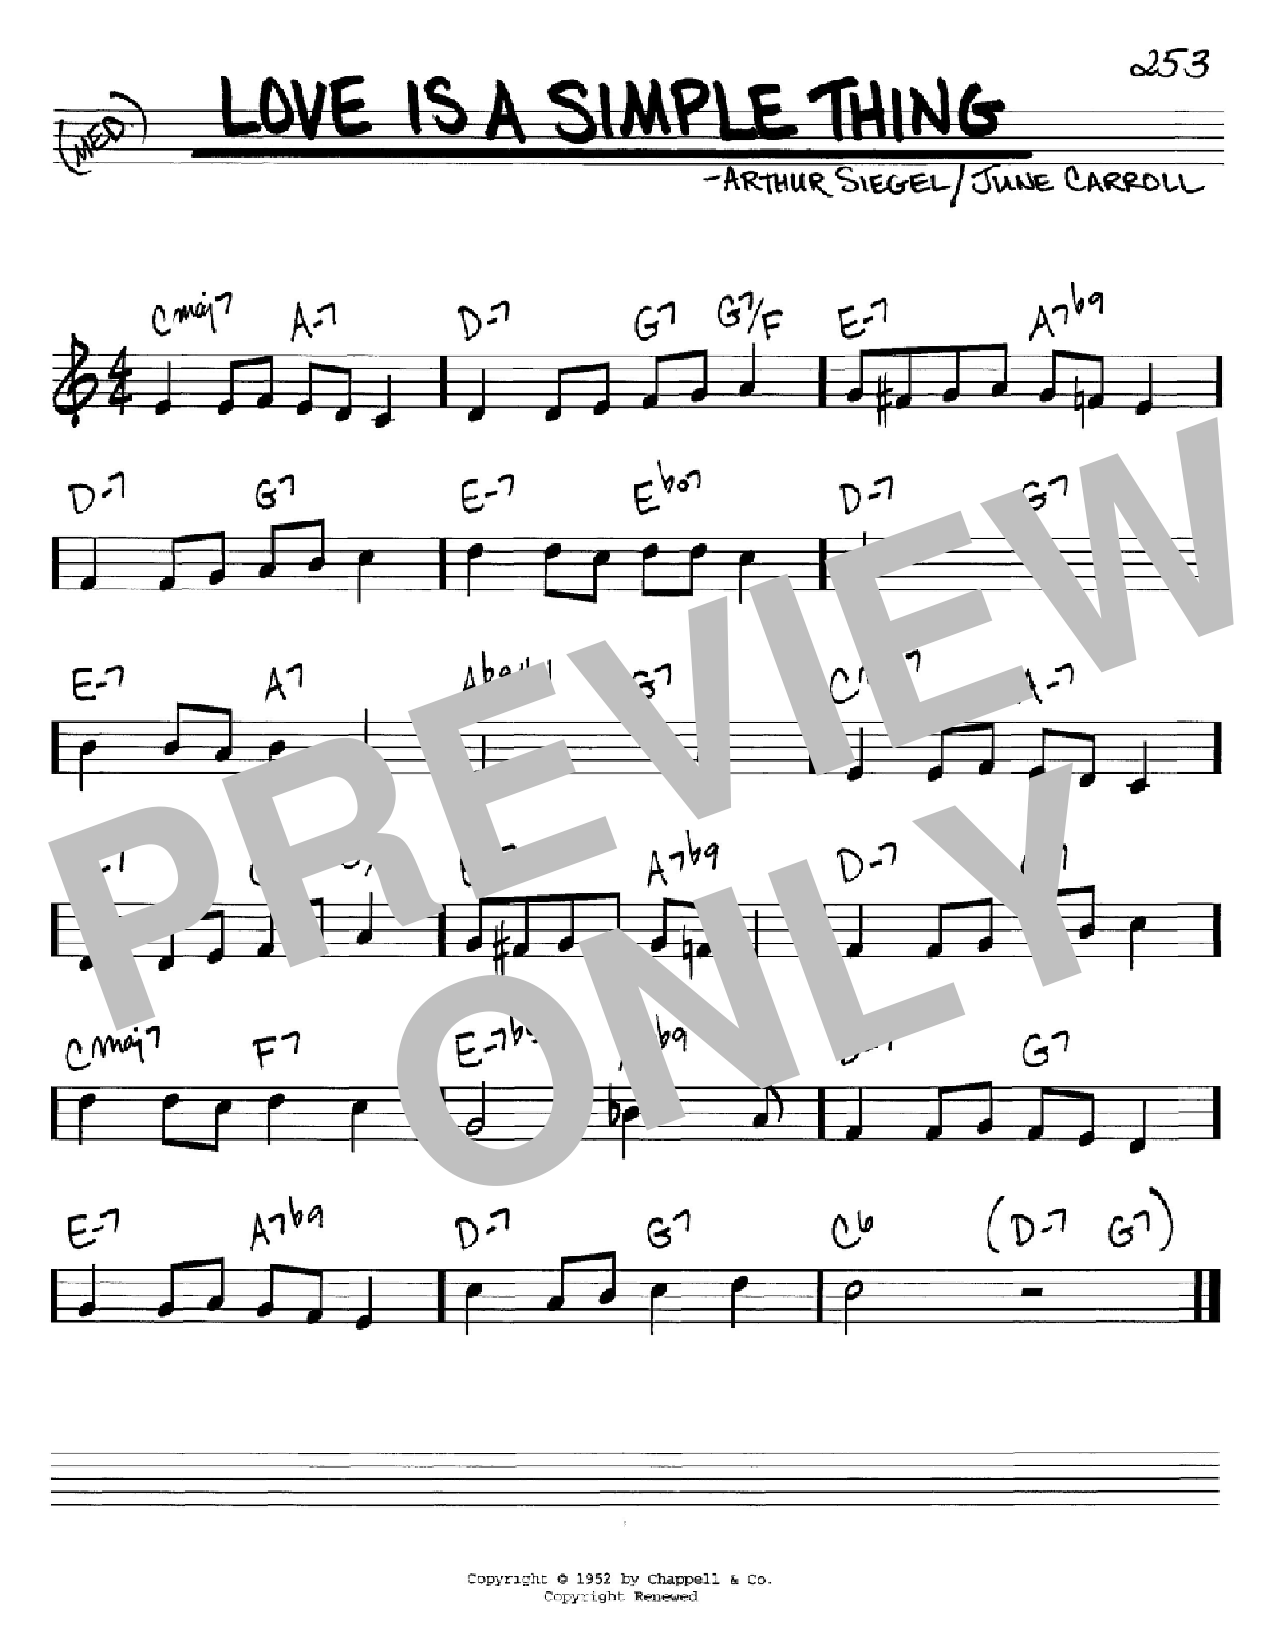 Download June Carroll Love Is A Simple Thing Sheet Music